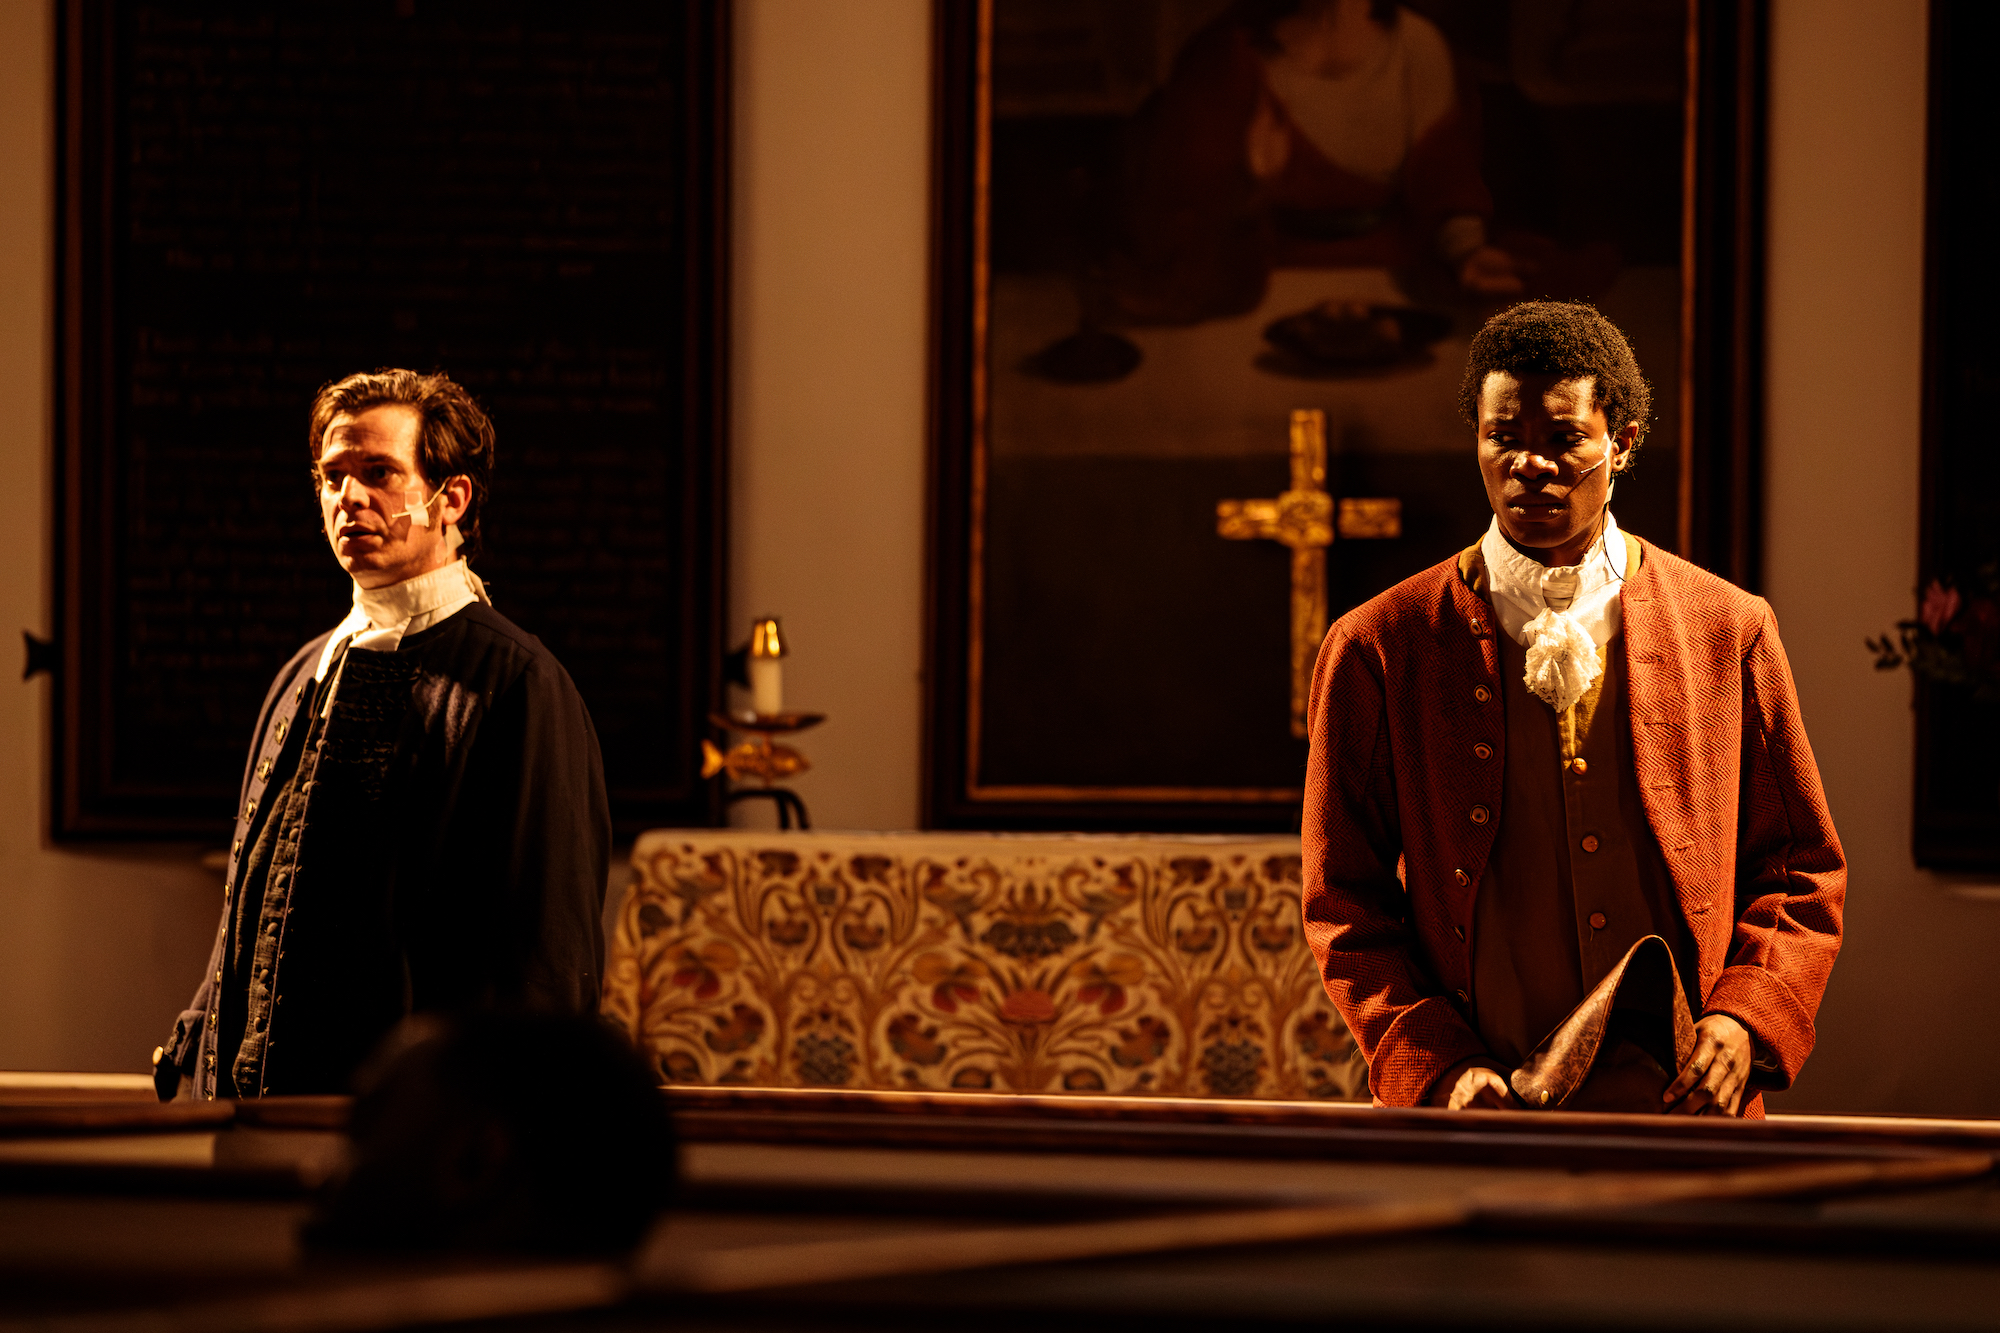 Tim Hoover as Mather Byles and Joshua Lee Robinson as Cato in "Revolution's Edge" at the Old North Church. 